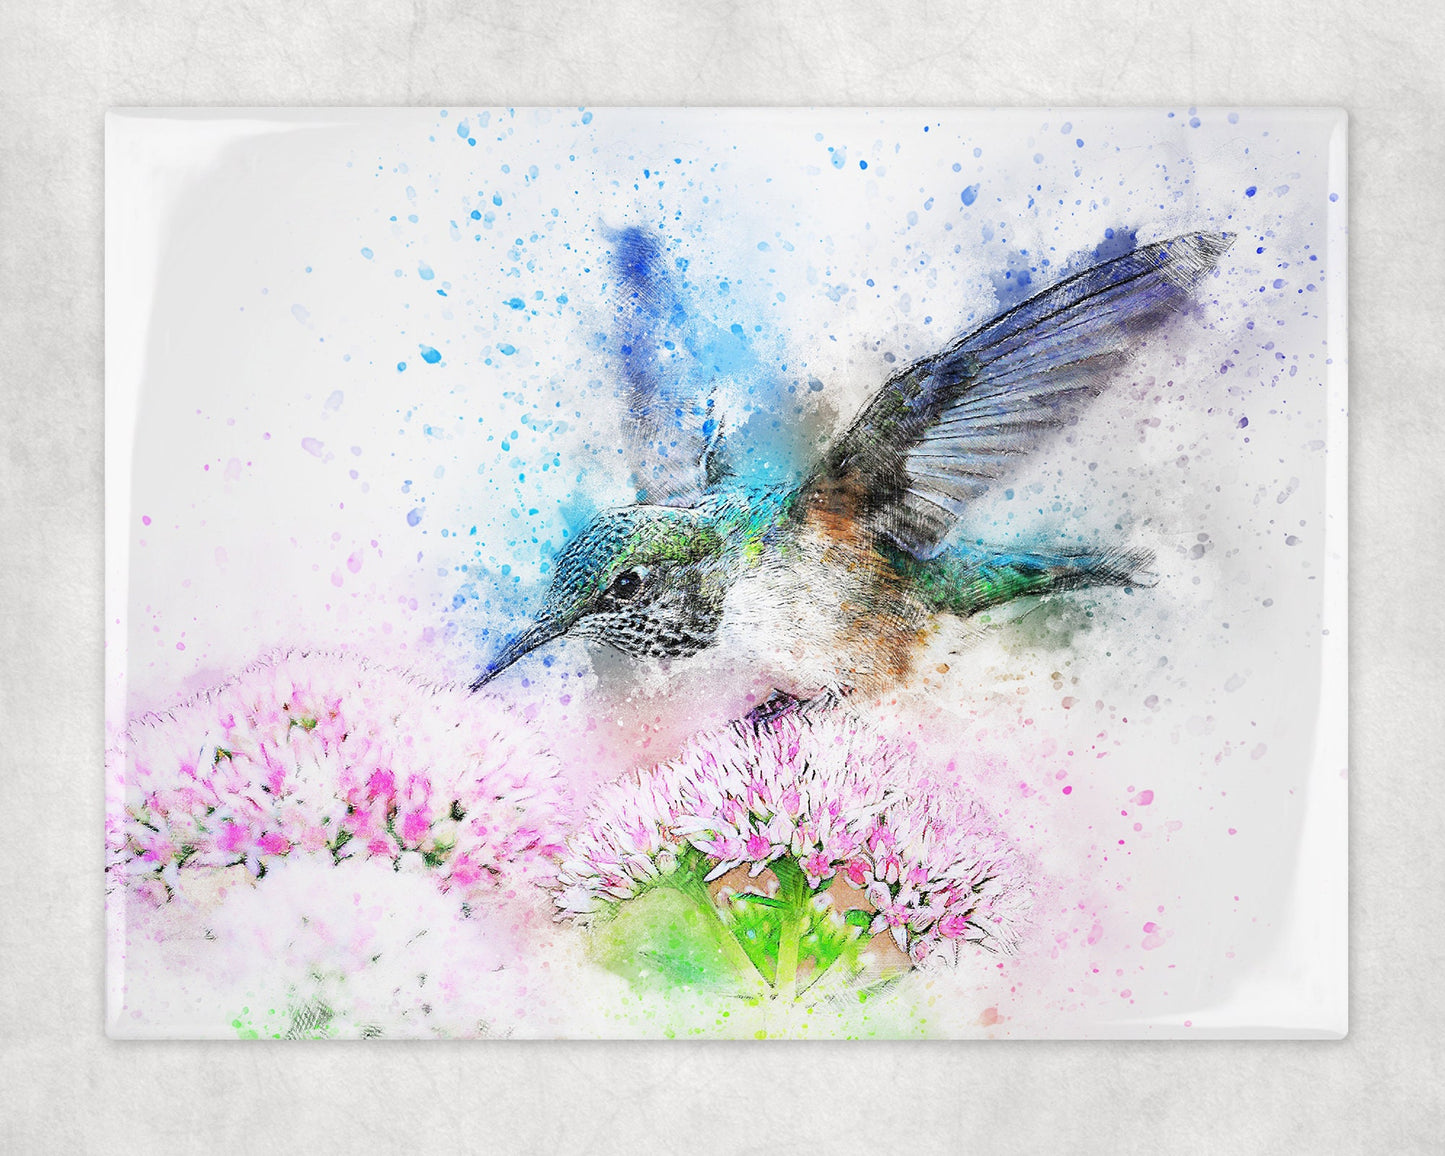 Watercolor Style Hummingbird Art Decorative Ceramic Tile with Optional Easel Back - 6x8 inches